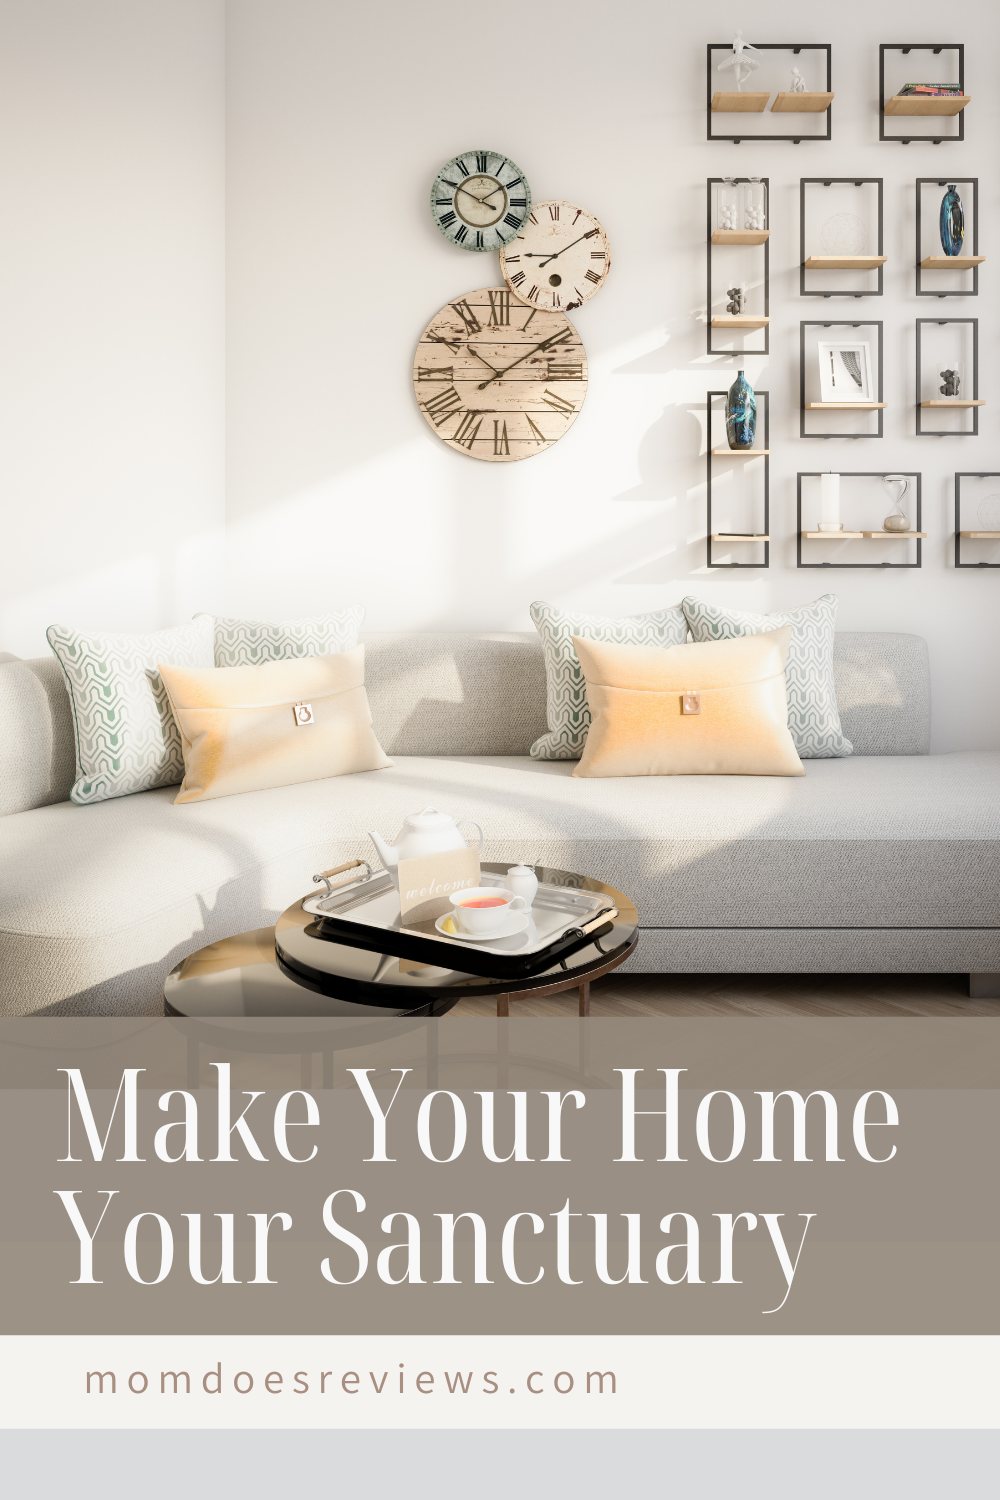 How To Make Your Home Your Sanctuary